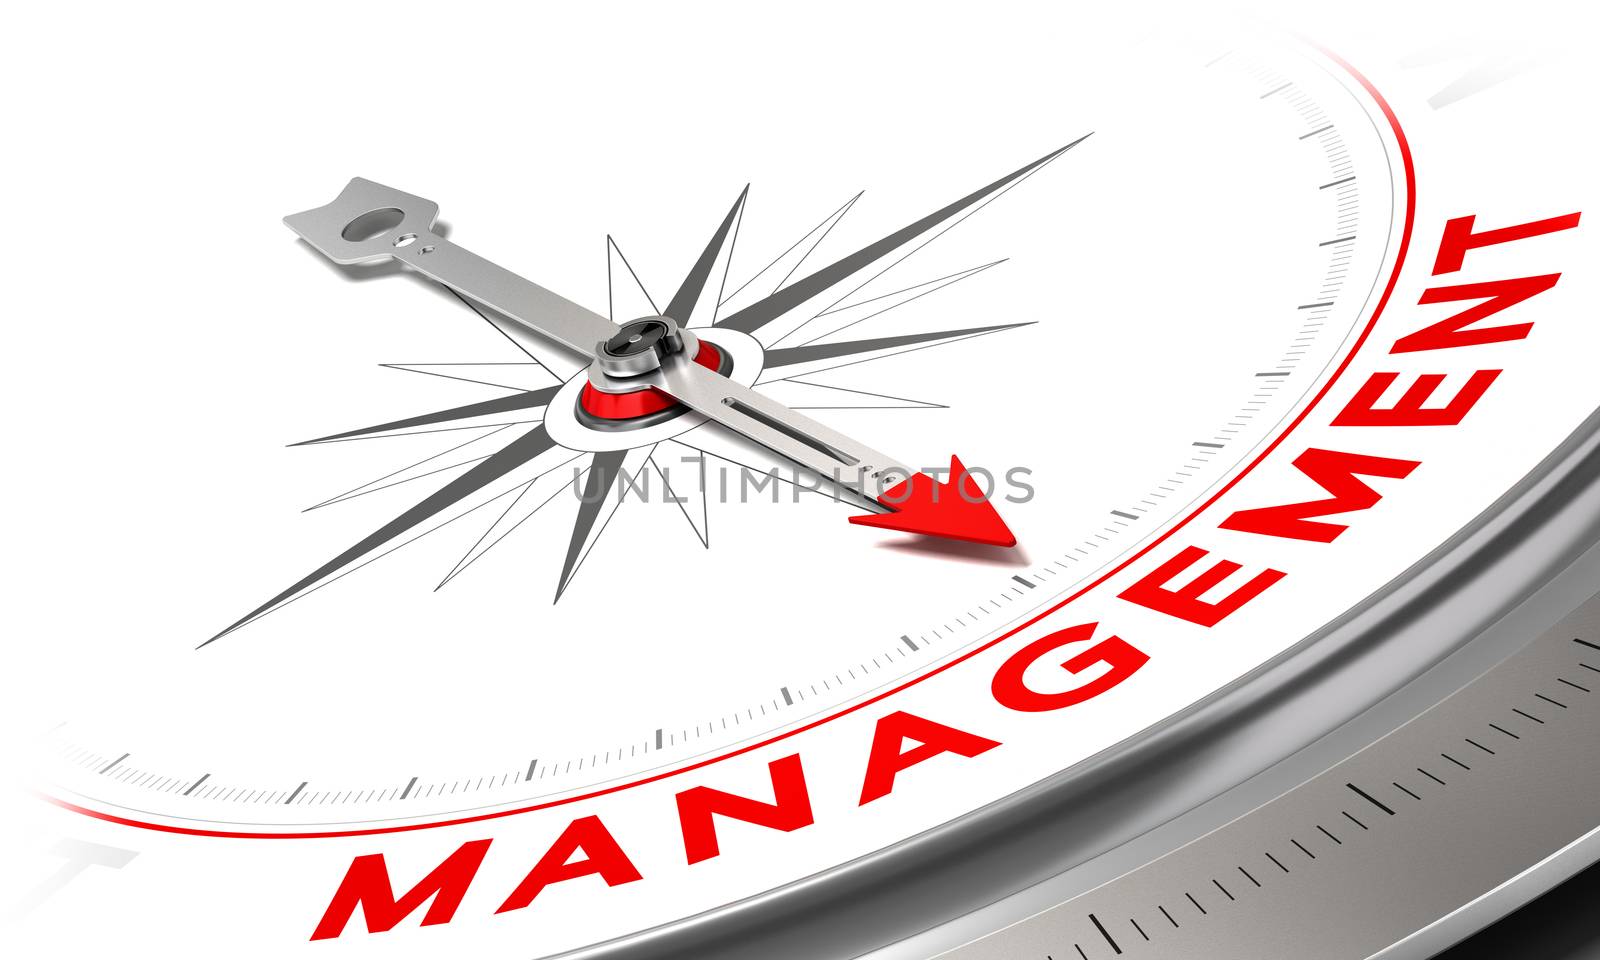 Compass with needle pointing the word management. Conceptual illustration of risk management. Business concept image.